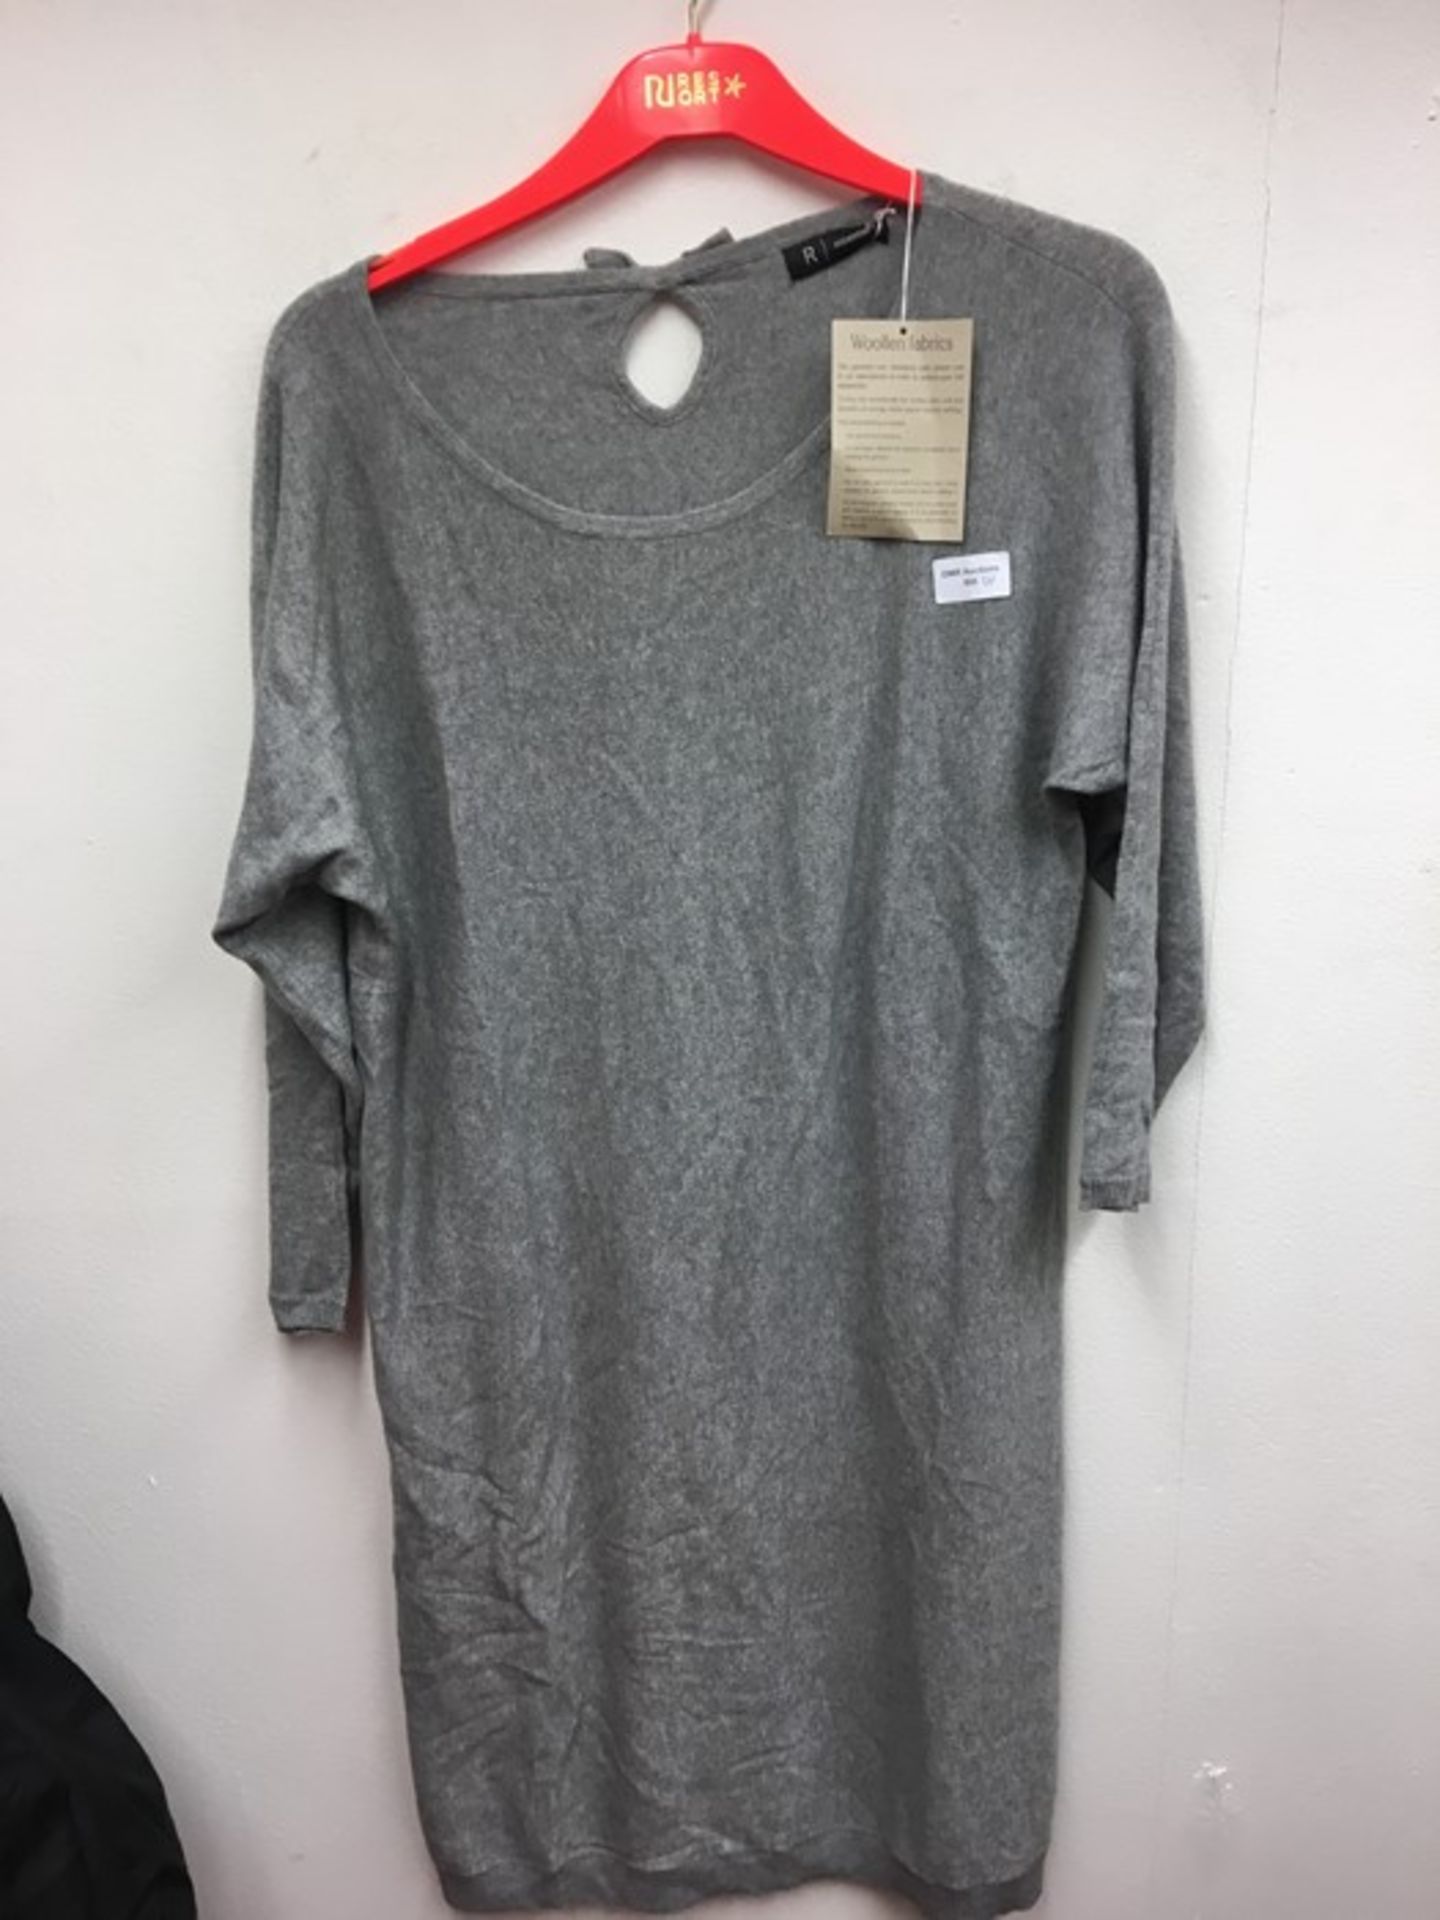 1 AS NEW LA REDOUTE LADIES GREY LONG LENGTH TOP IN MEDIUM SIZE (VIEWING HIGHLY RECOMMENDED)